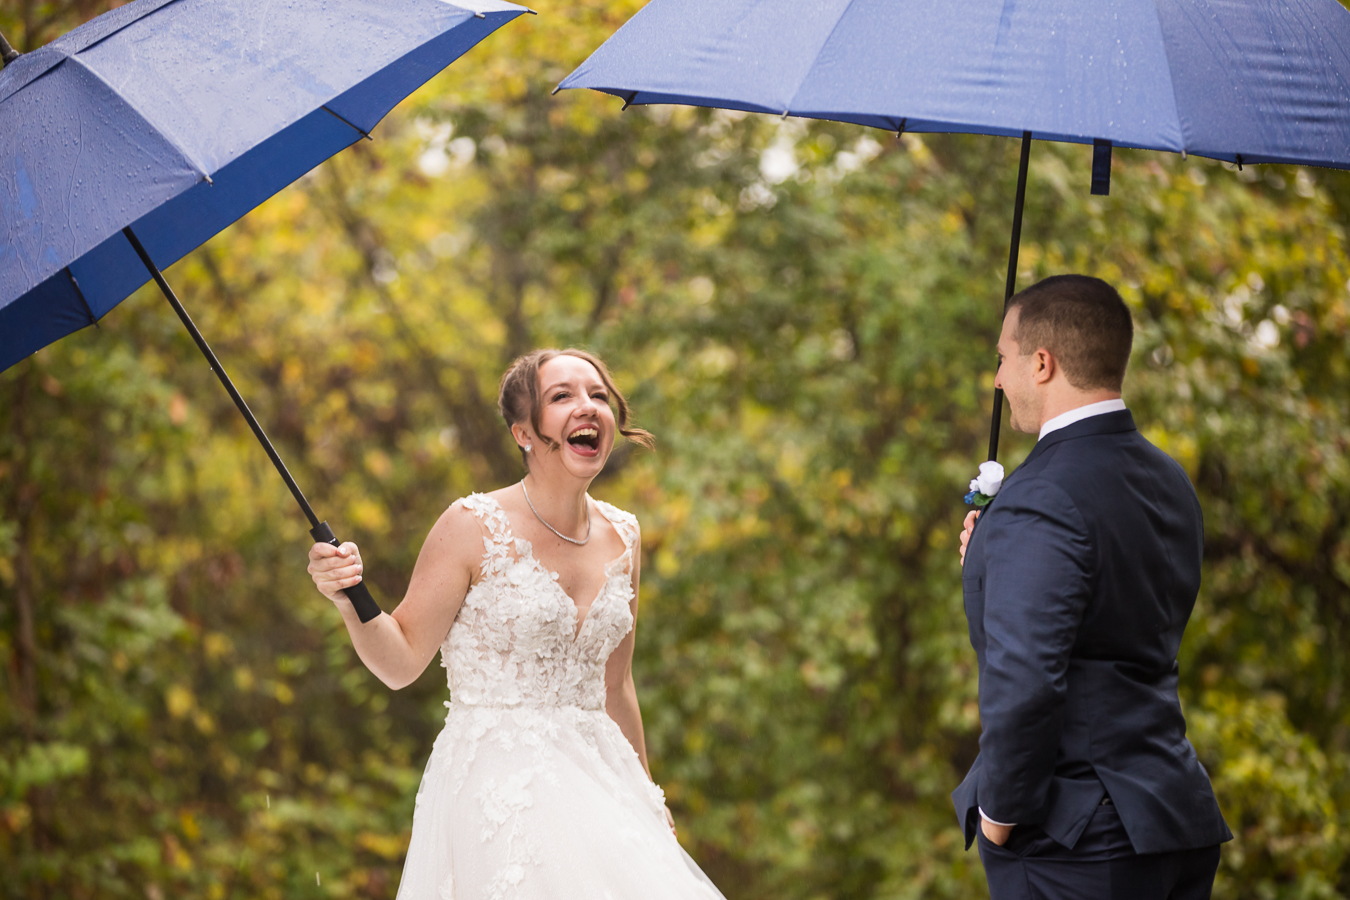 image of the bride as she smiles and laughs from seeing her groom for the first time as they both stand underneath umbrellas during their rainy day first look before their central pa wedding ceremony 